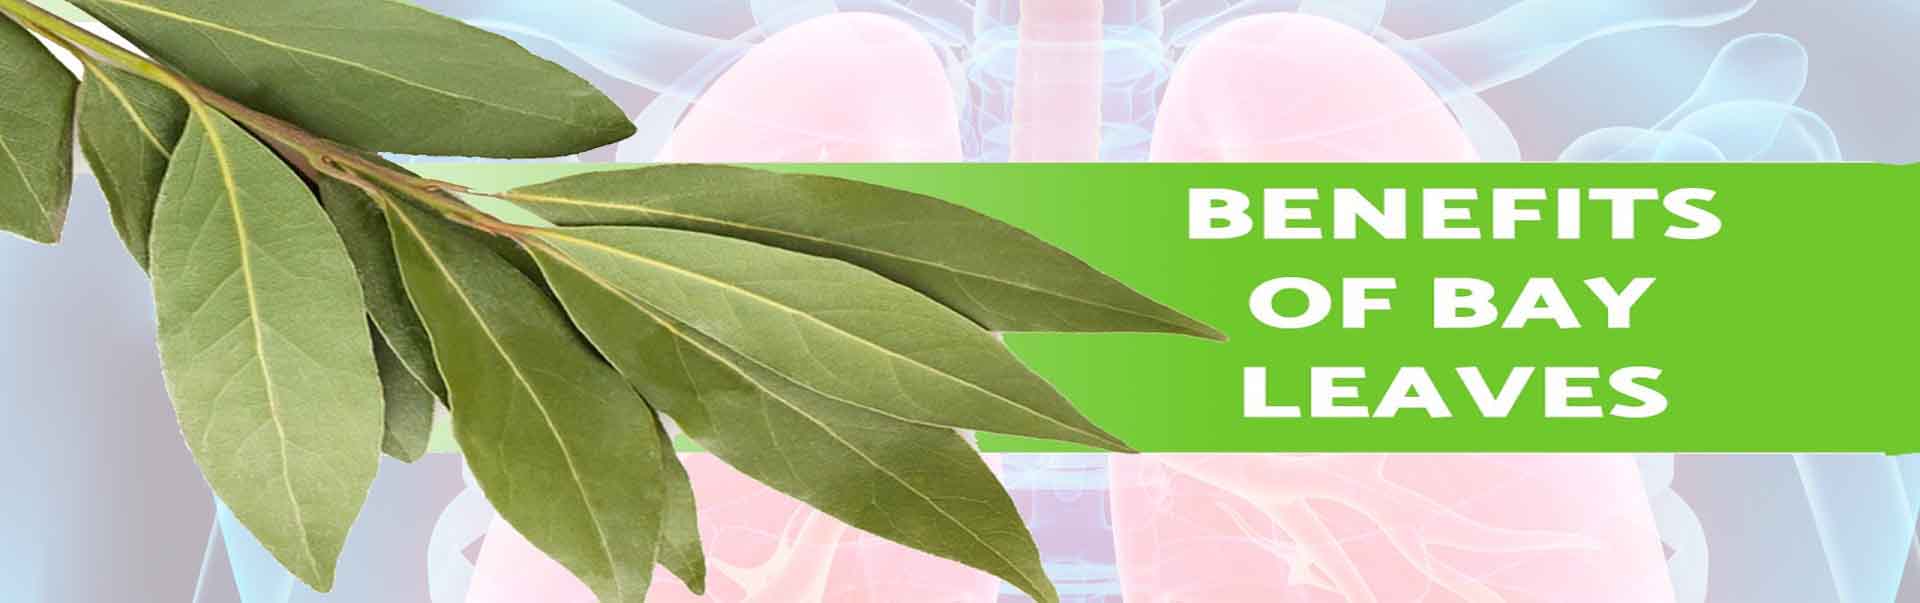 Bay Leaves Help Respiratory System